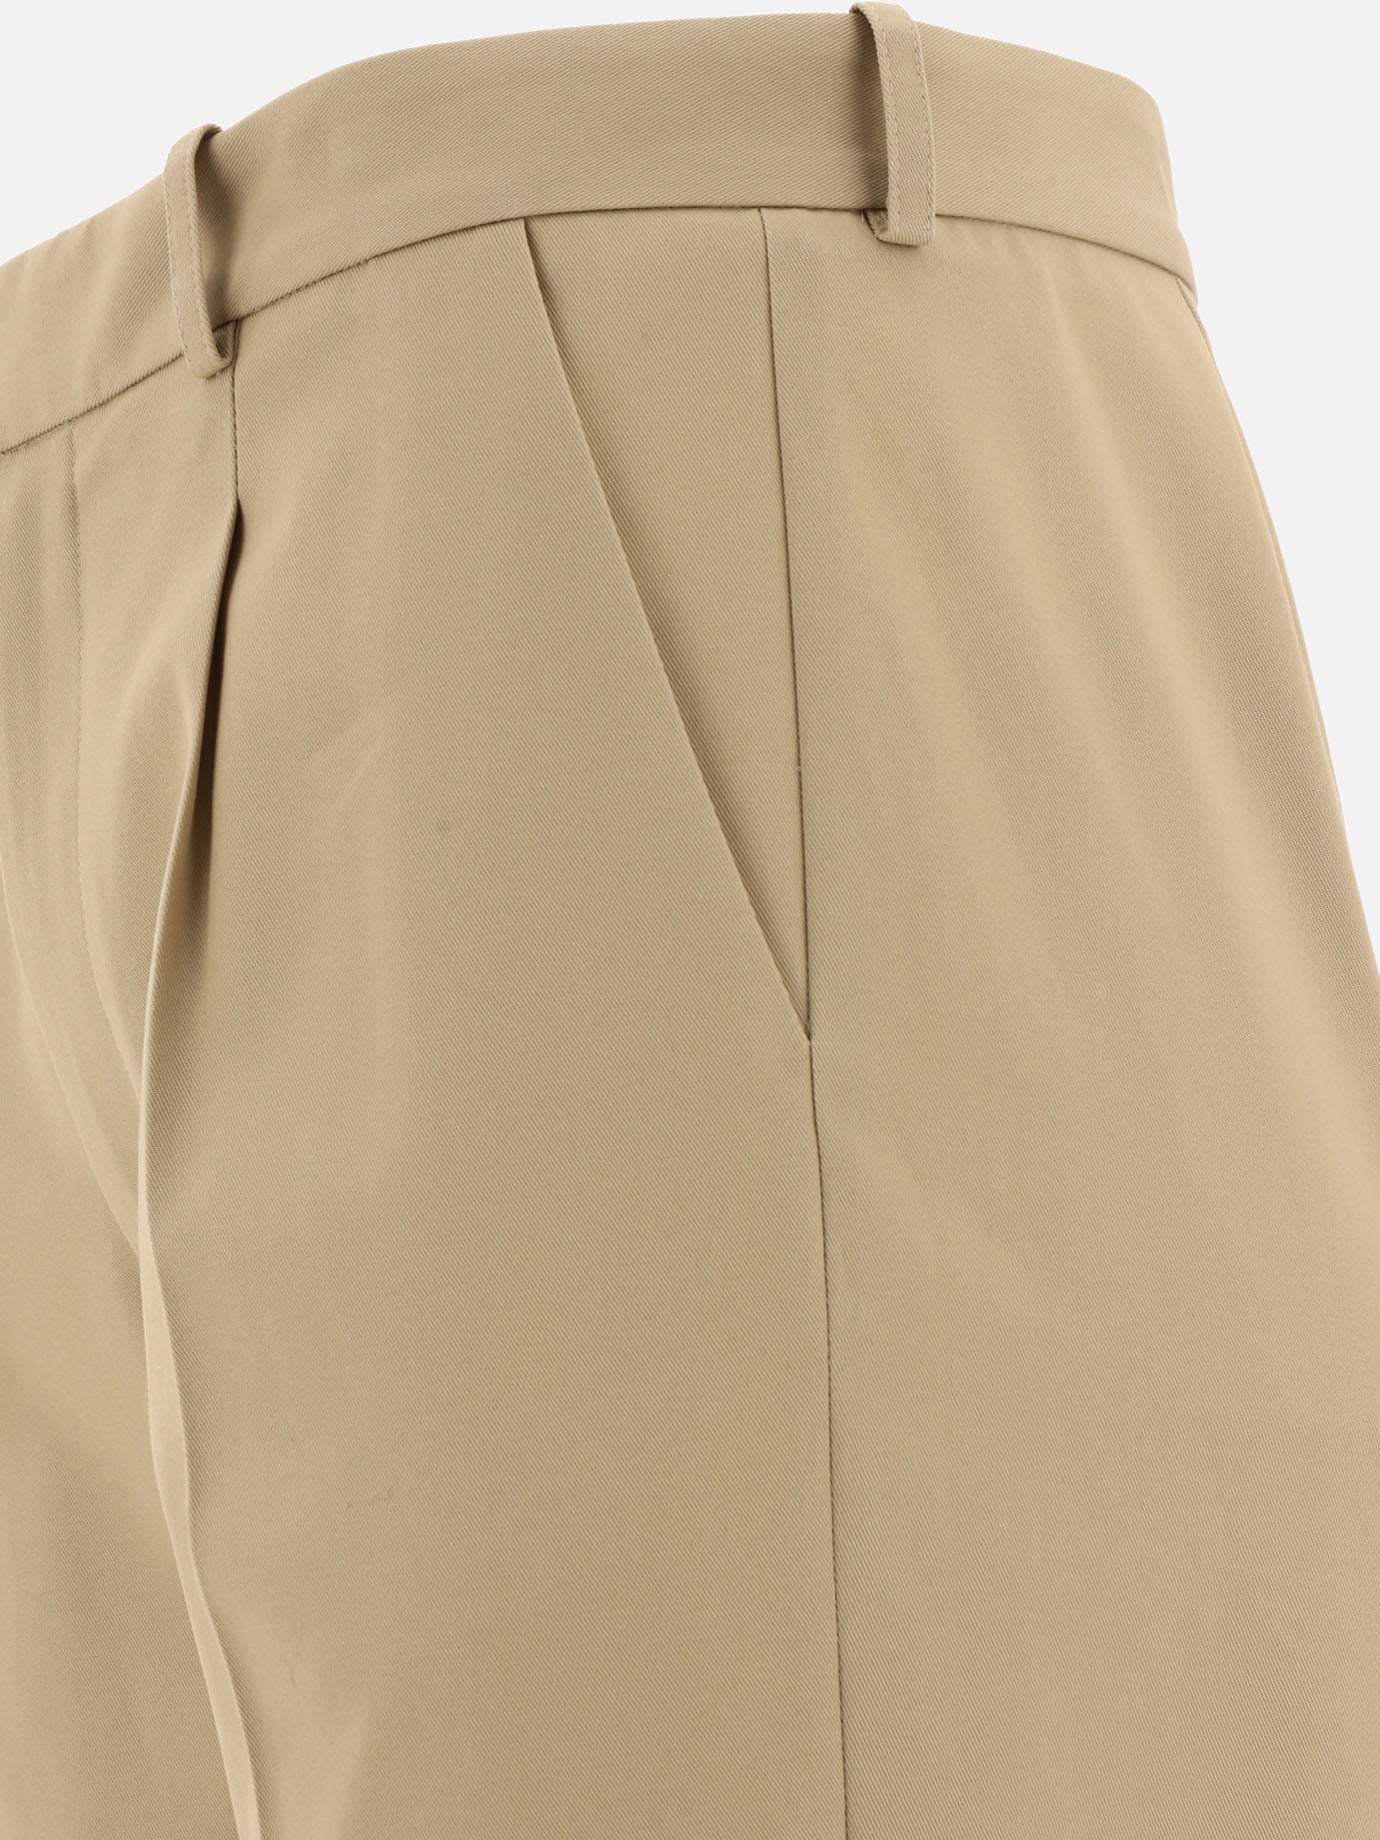 "Tapered Chino" trousers